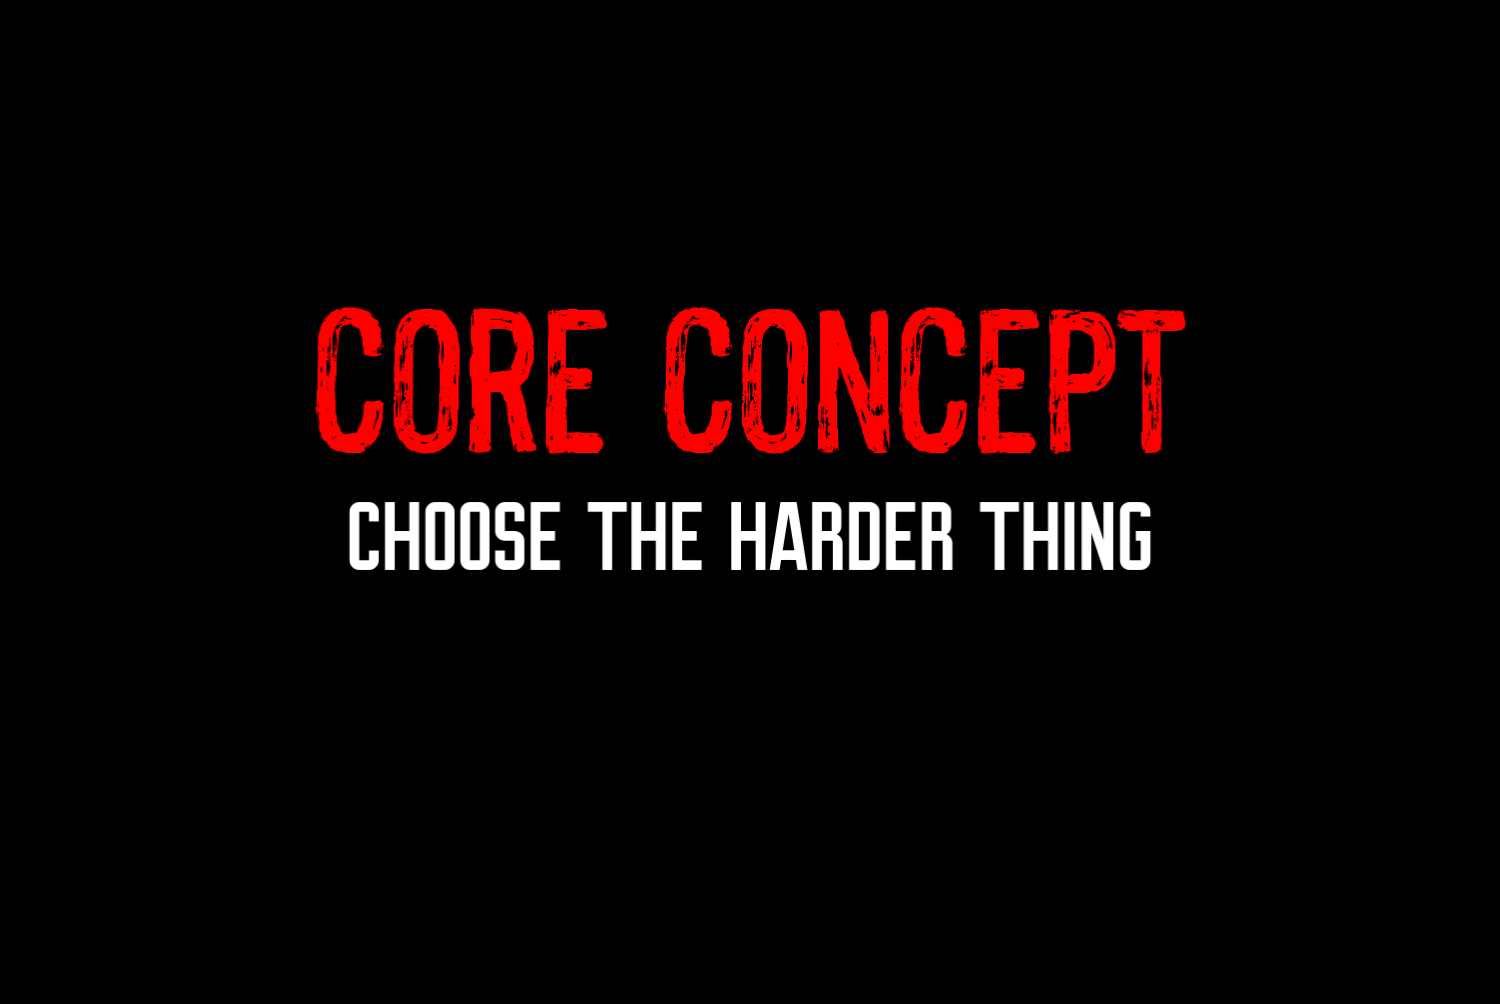 core concept_choose the harder thing